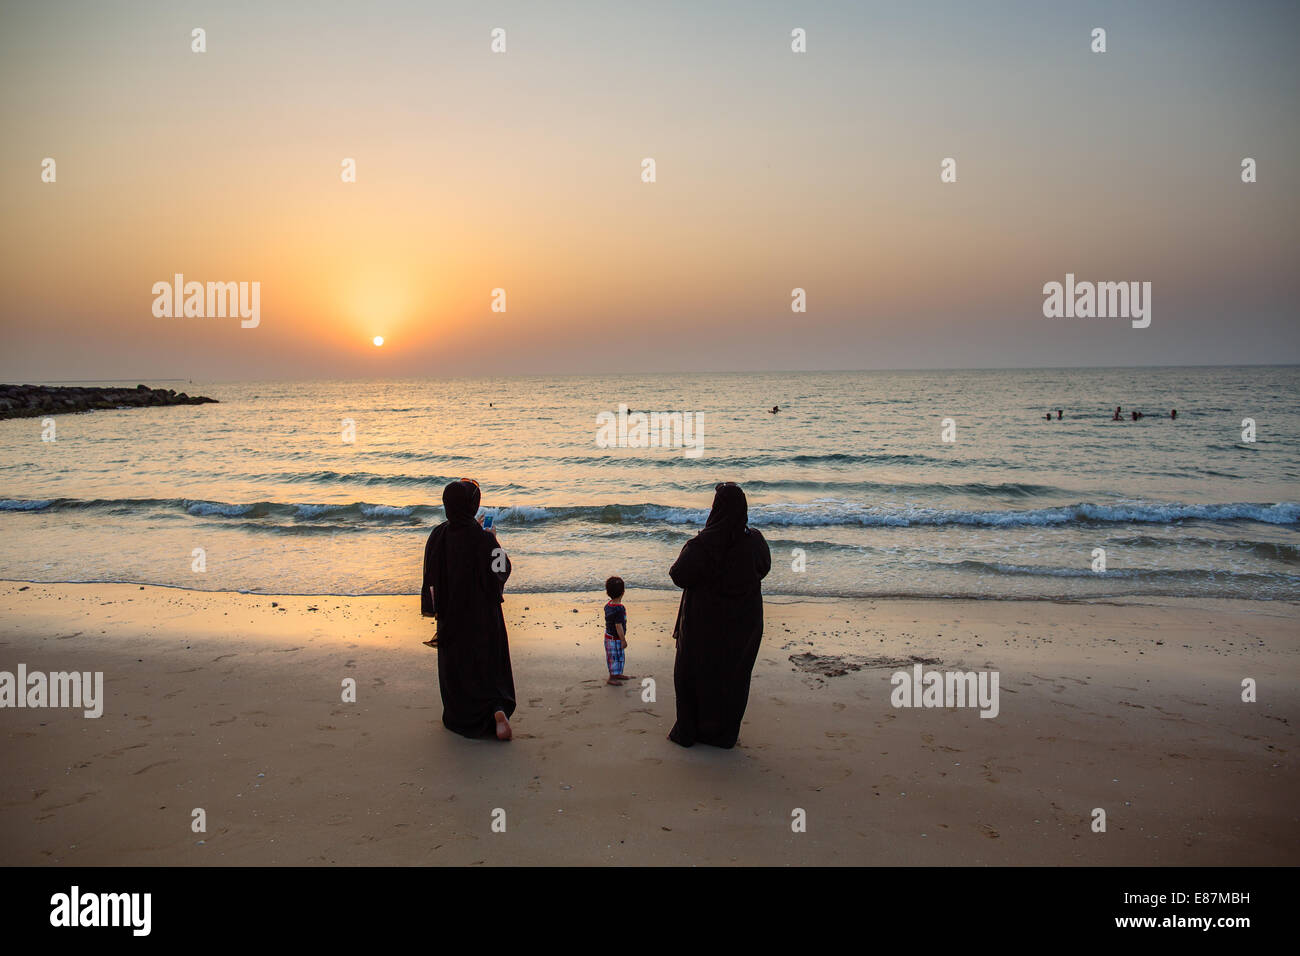 little kid and arab women in traditional clothing with abayah, staring at the sea during sunset, landscape Stock Photo